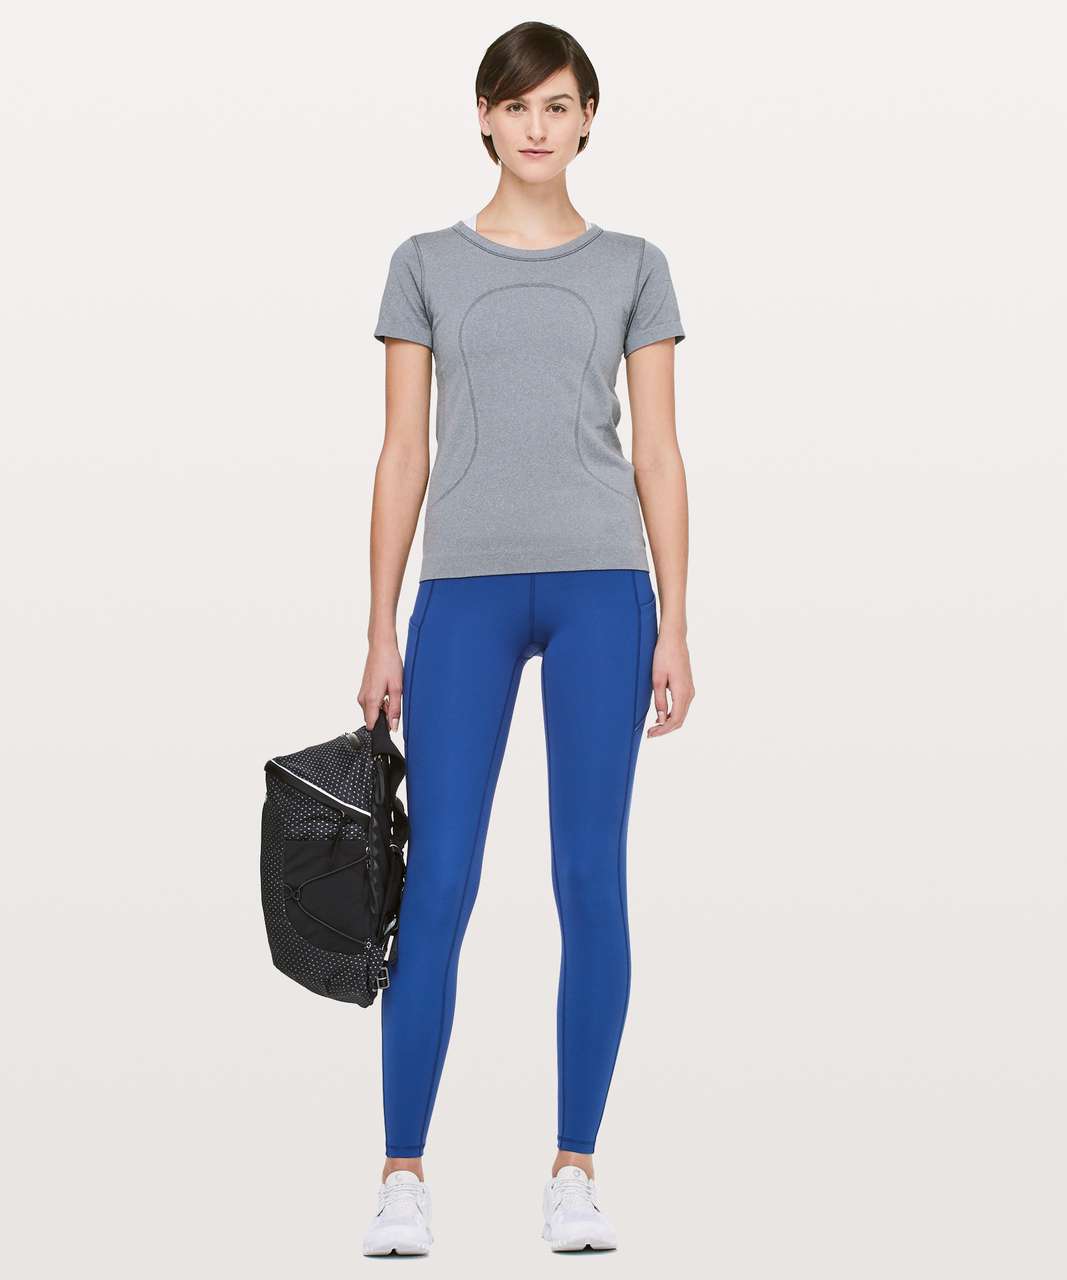 Lululemon Speed Up Tight *Full-On Luxtreme 28" - Cyber Blue